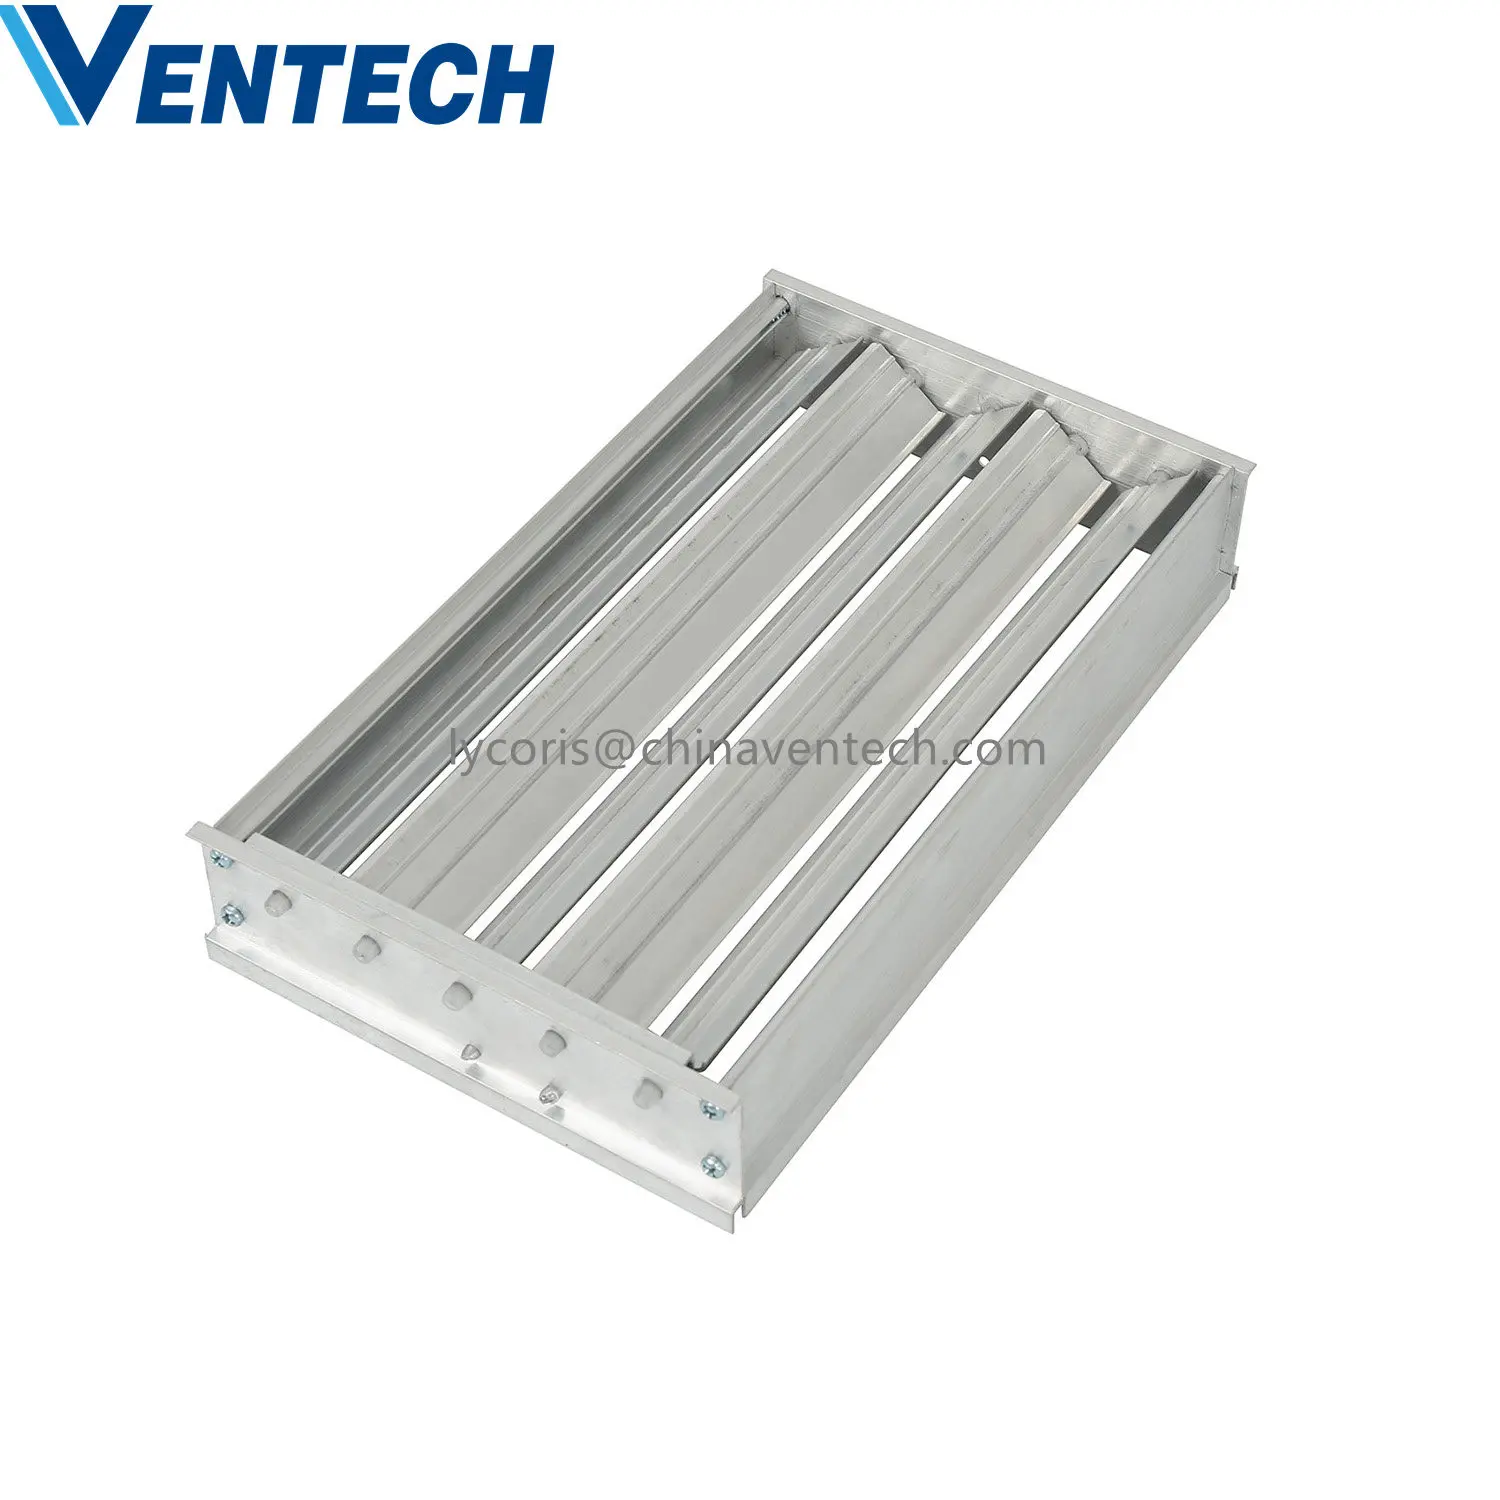 4 Way Ceiling Air Diffuser Gear Type Oppose Blade Damper Square Diffuser Air Damper Manual Duct Supply Grille Aluminum Damper